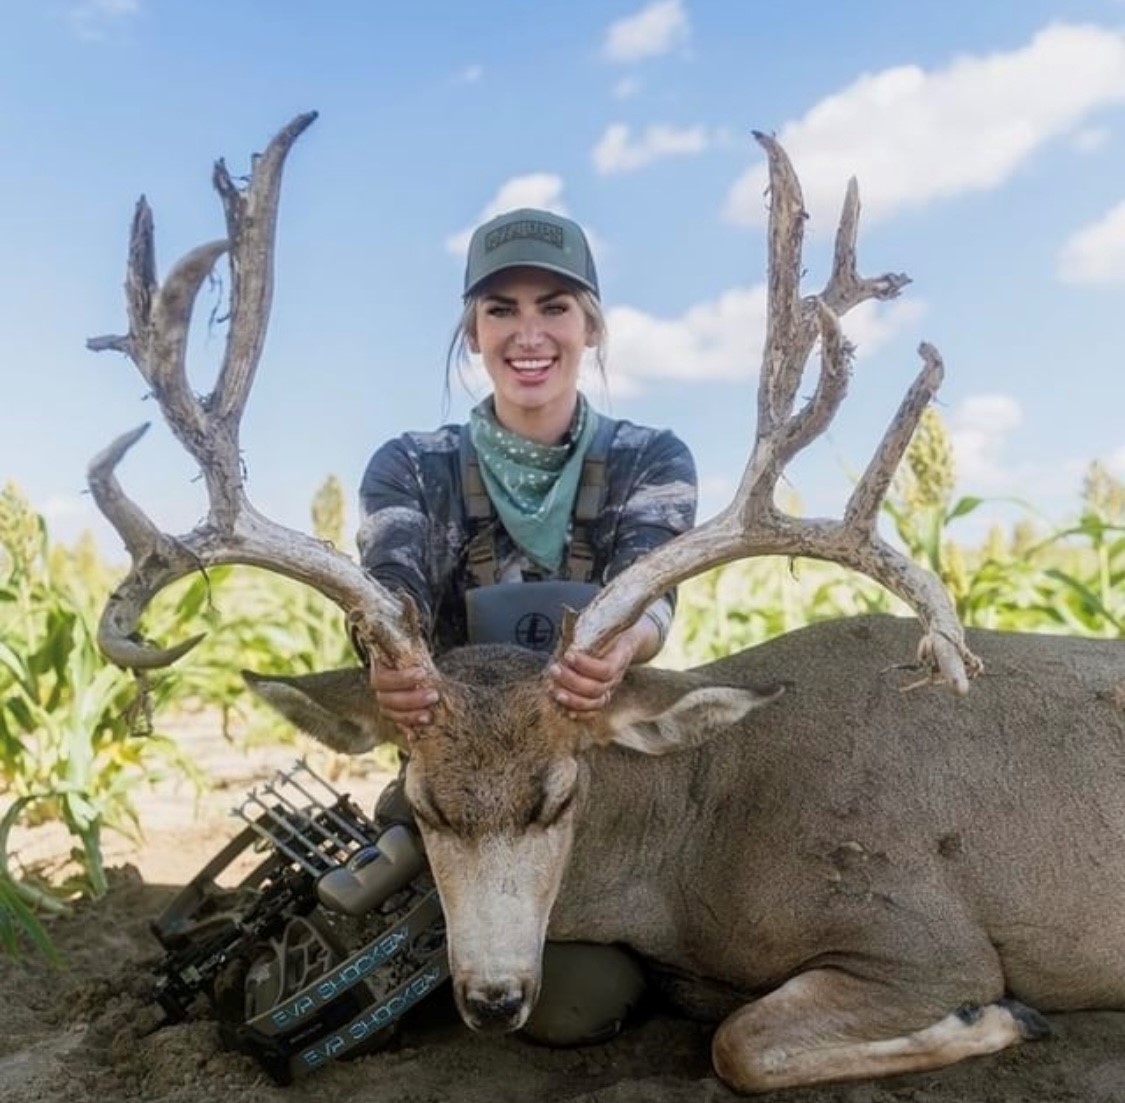 Help us congratulate Eva Shockey for recently downing this mega giant free range mule deer while on a spot & stalk hunt in Colorado with her bow. Way to go Eva!!! #hunting #FindYourAdventure #ITSINOURBLOOD #WhatGetsYouOutdoors #IAMSPORTSMAN #deer #deerhunting #whitetails